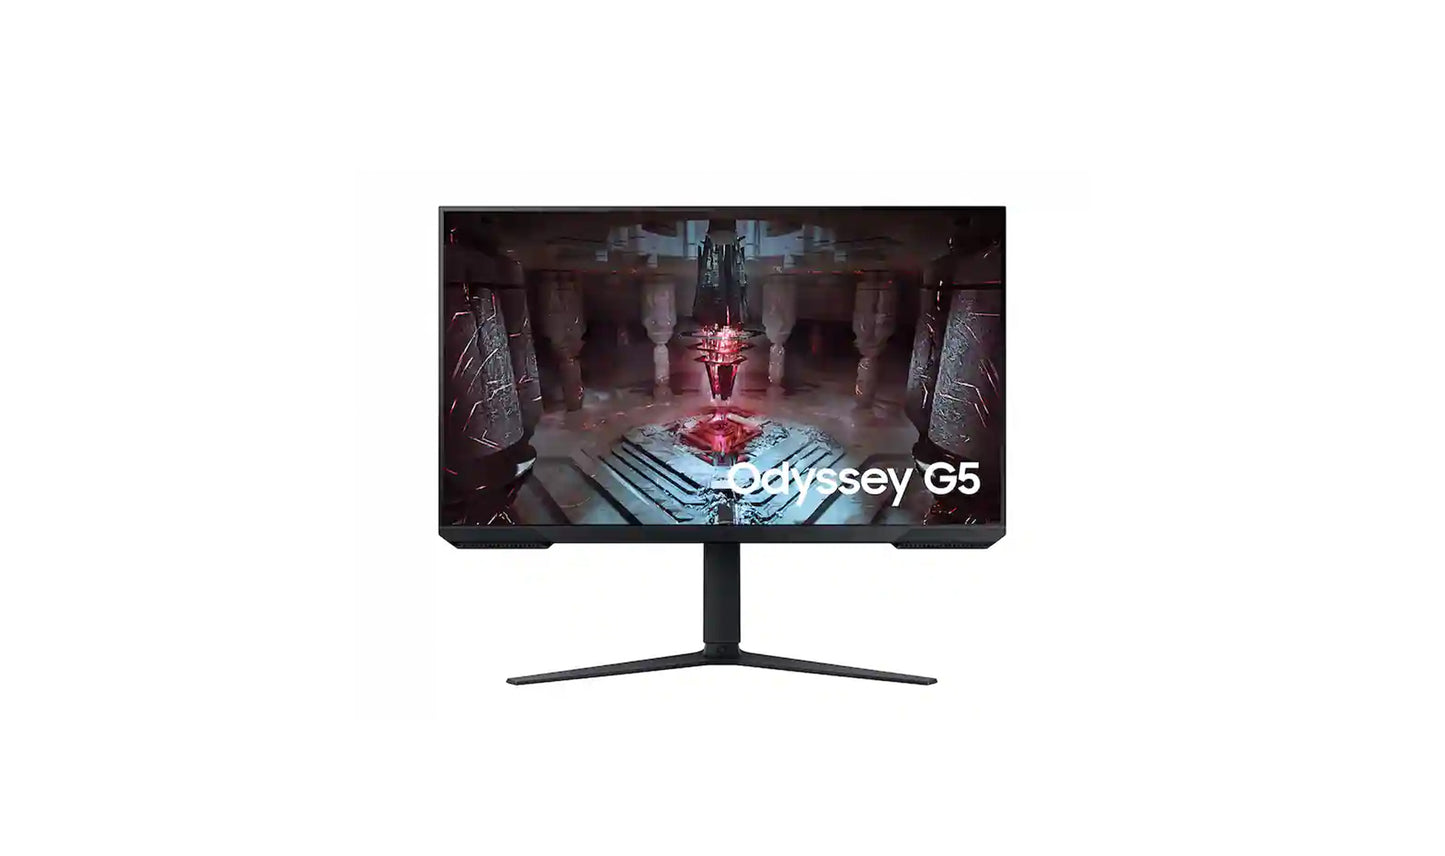 34" Odyssey G55T WQHD 165Hz 1ms(MPRT) HDR Curved Gaming Monitor